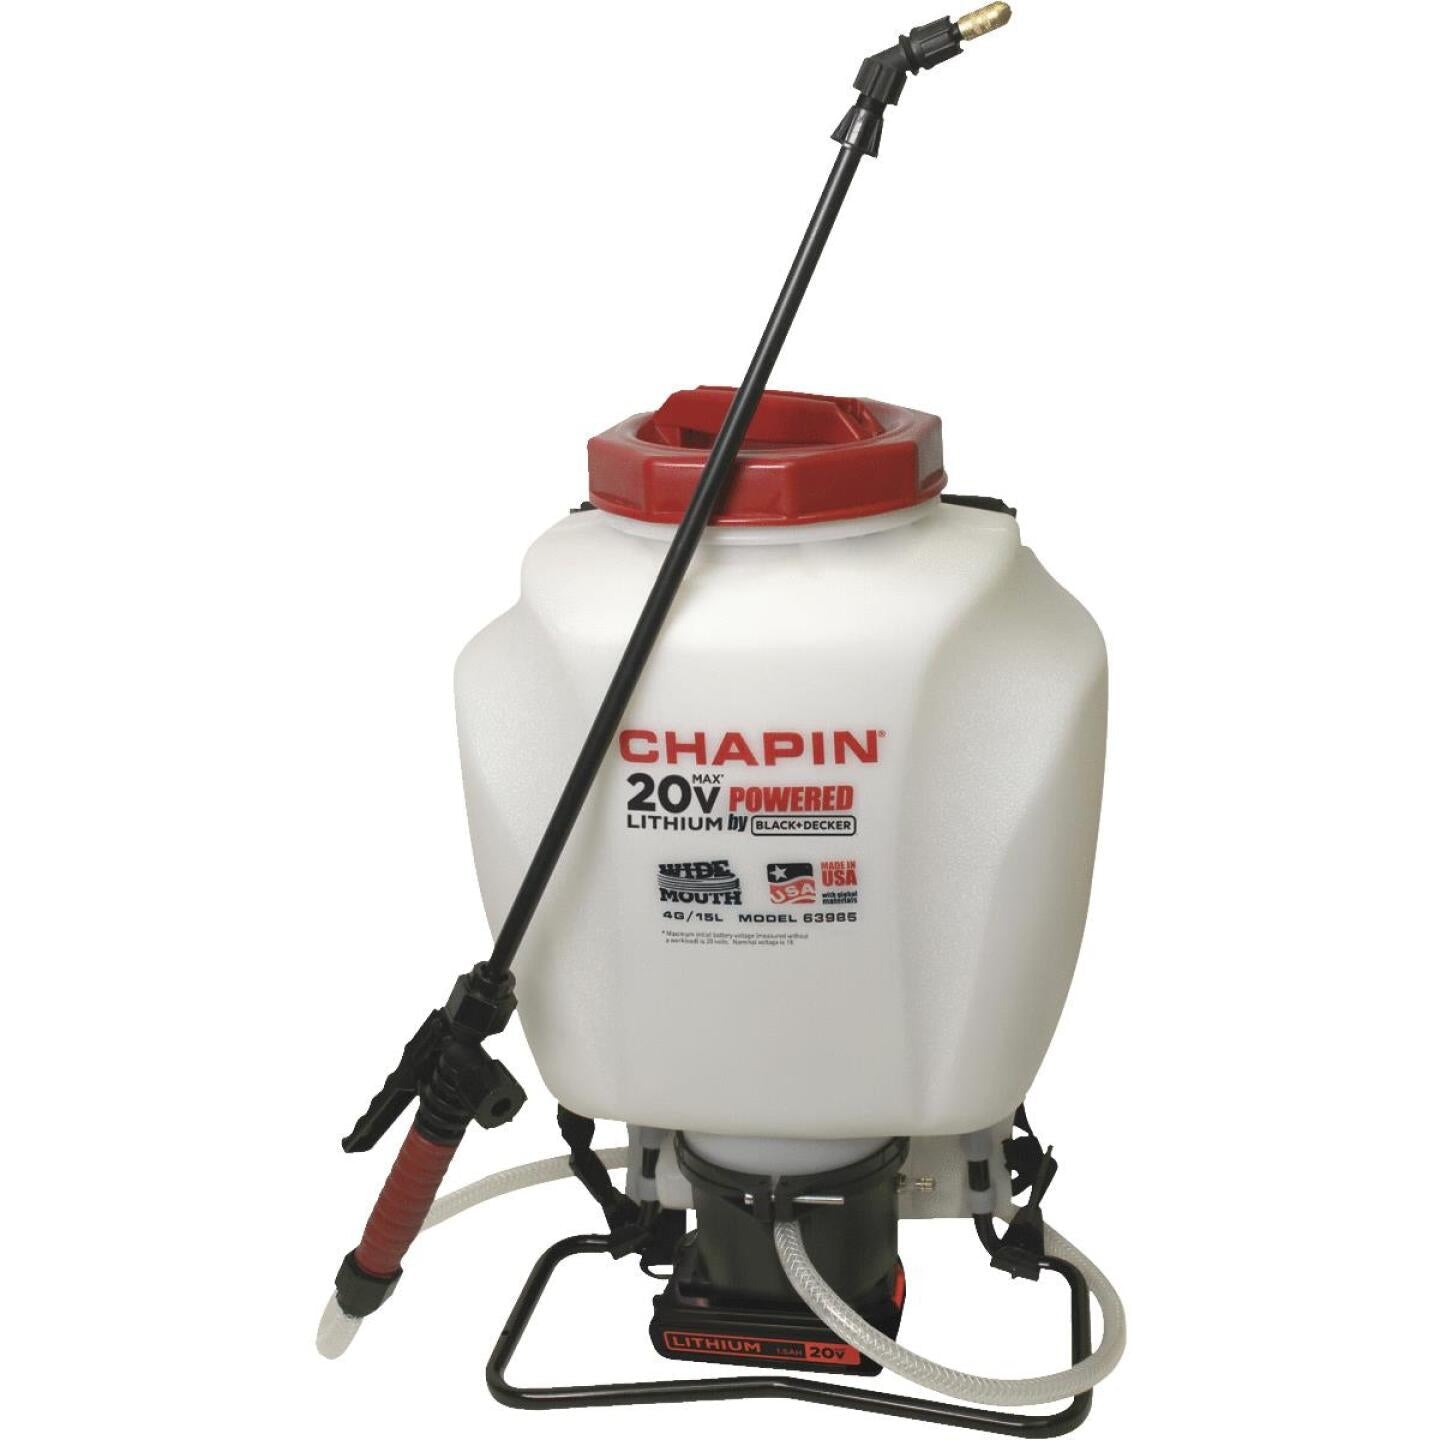 CHAPIN, Chapin 4 Gal. Rechargeable Backpack Sprayer